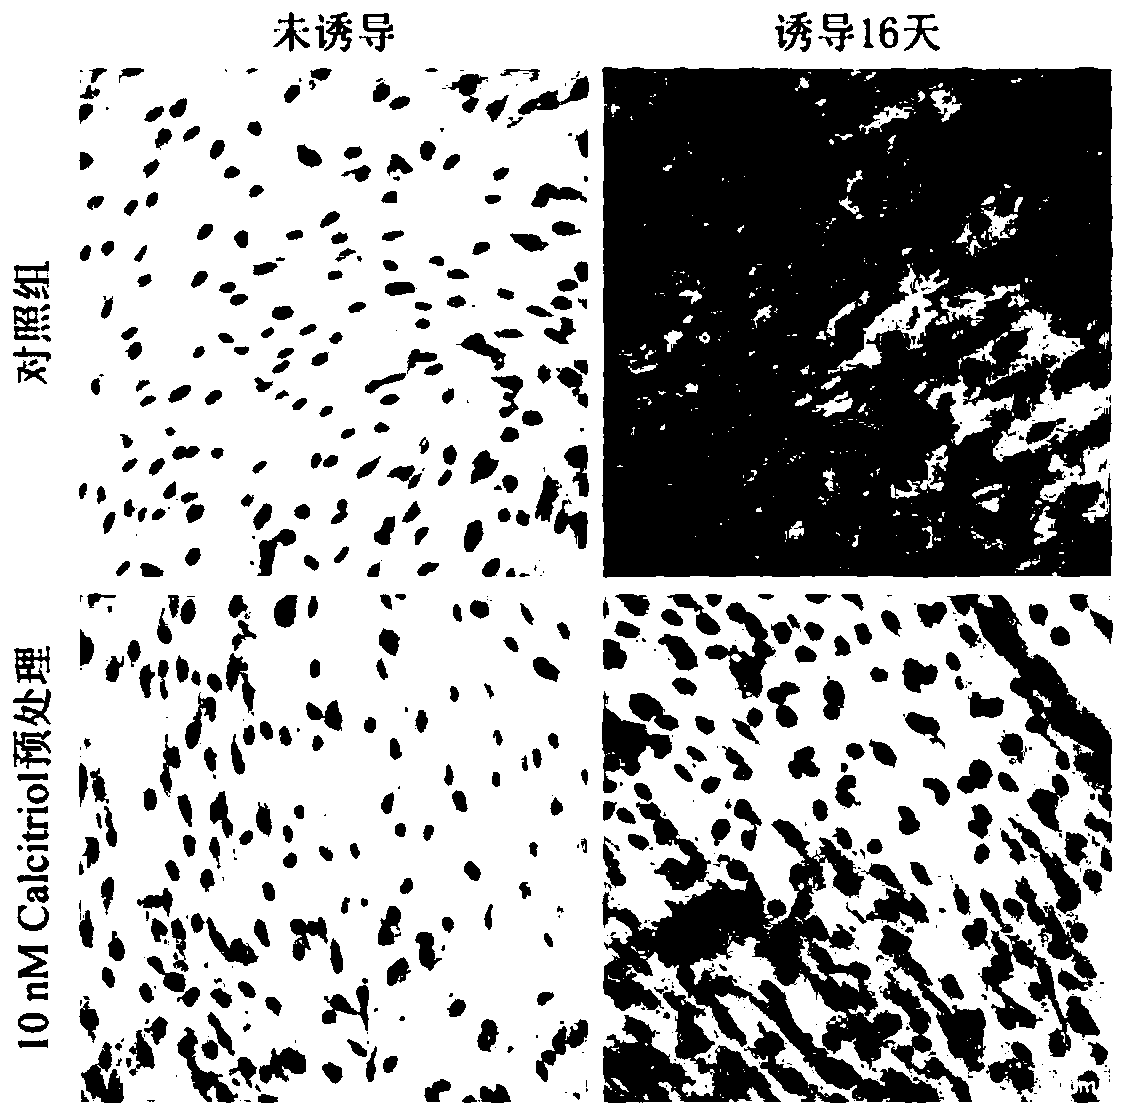 Application of vitamin D3 and analogues thereof in promoting differentiation of human skin fibroblasts into adipocytes